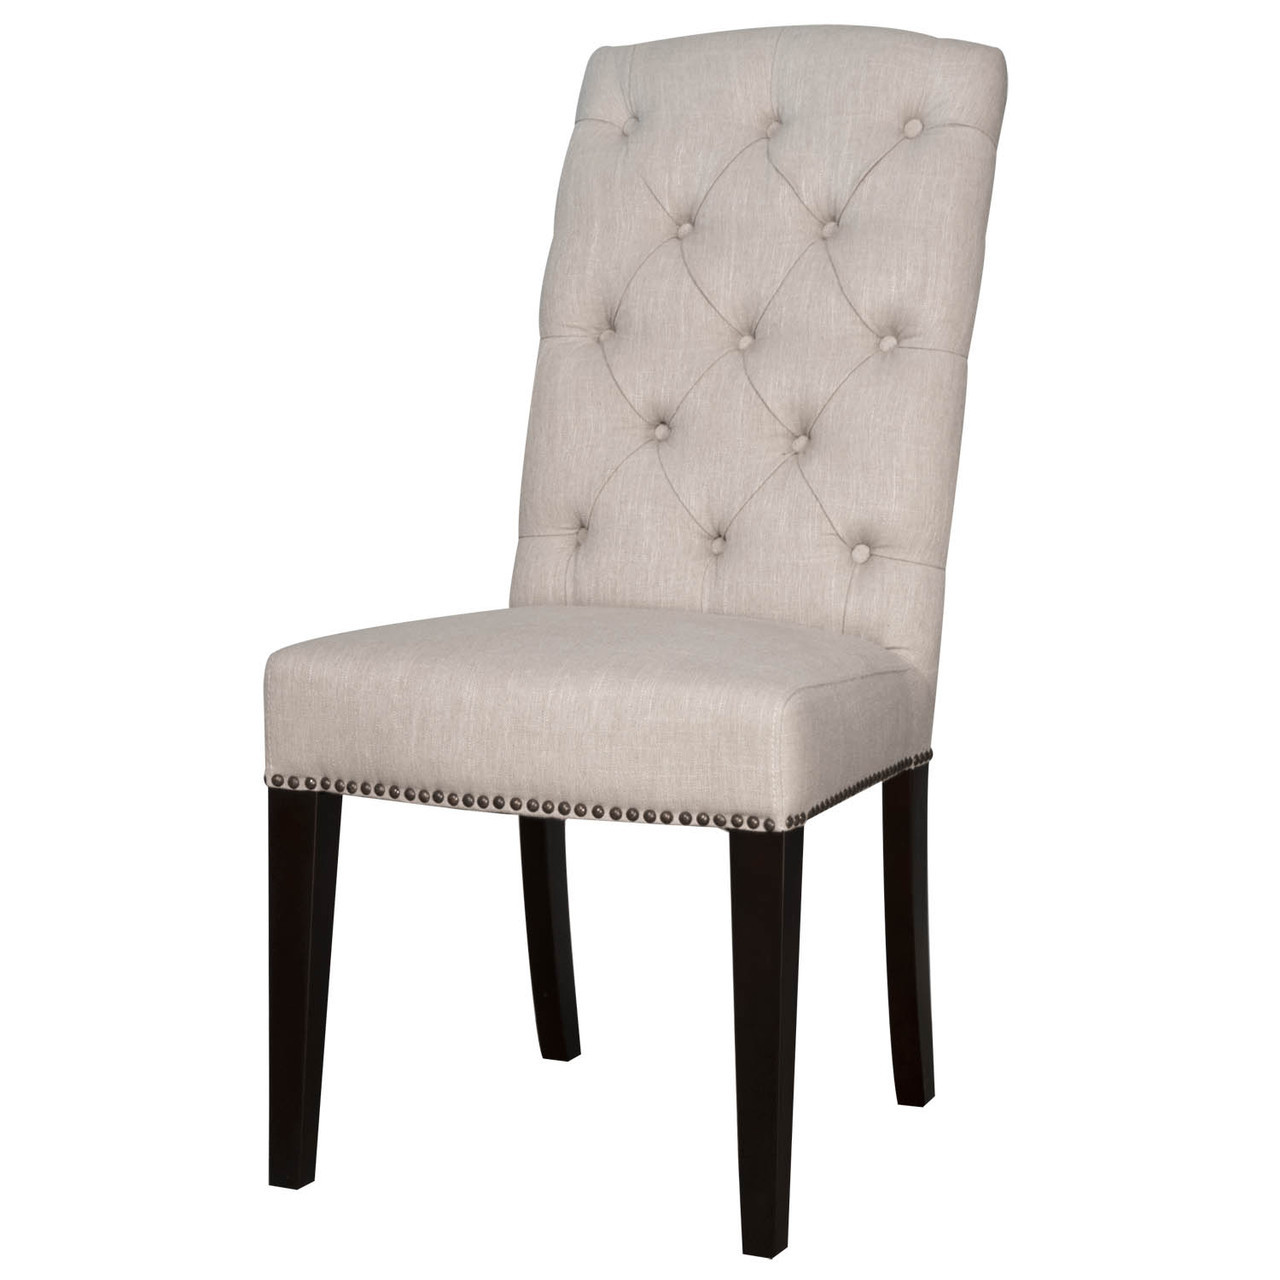 Maddy Upholstered Tufted Back Dining Chair | Zin Home